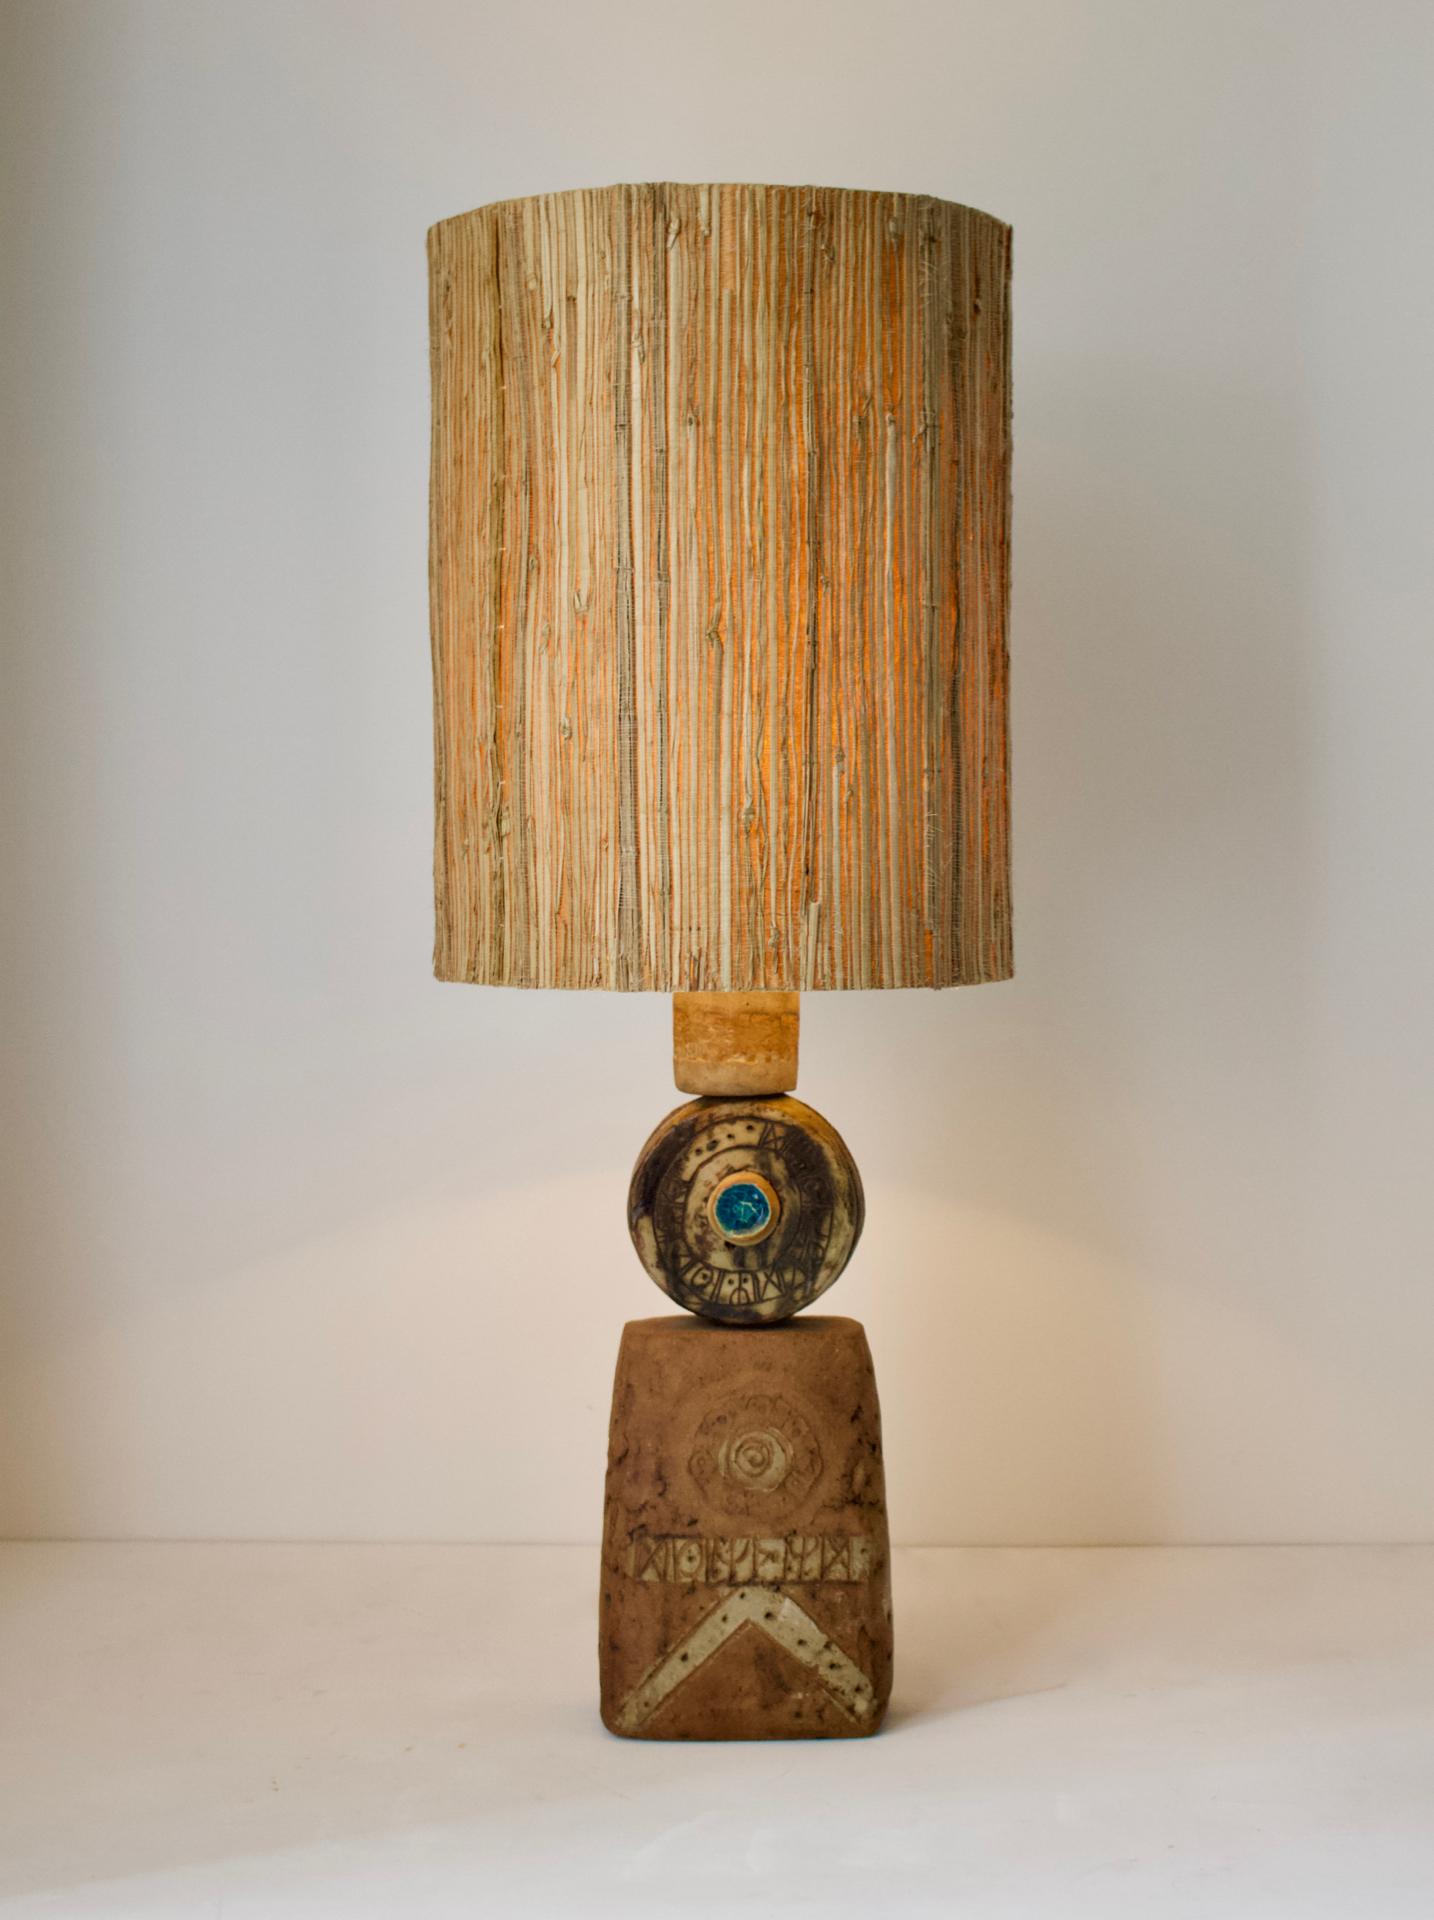 A single large, or oversize, ceramic TOTEM table lamp by Bernard Rooke, England, 1960s.

Sculptural piece, made of hand-formed ceramic elements in natural tones of terracotta, with a combination of dry and glazed finishes. The lamp is made up of